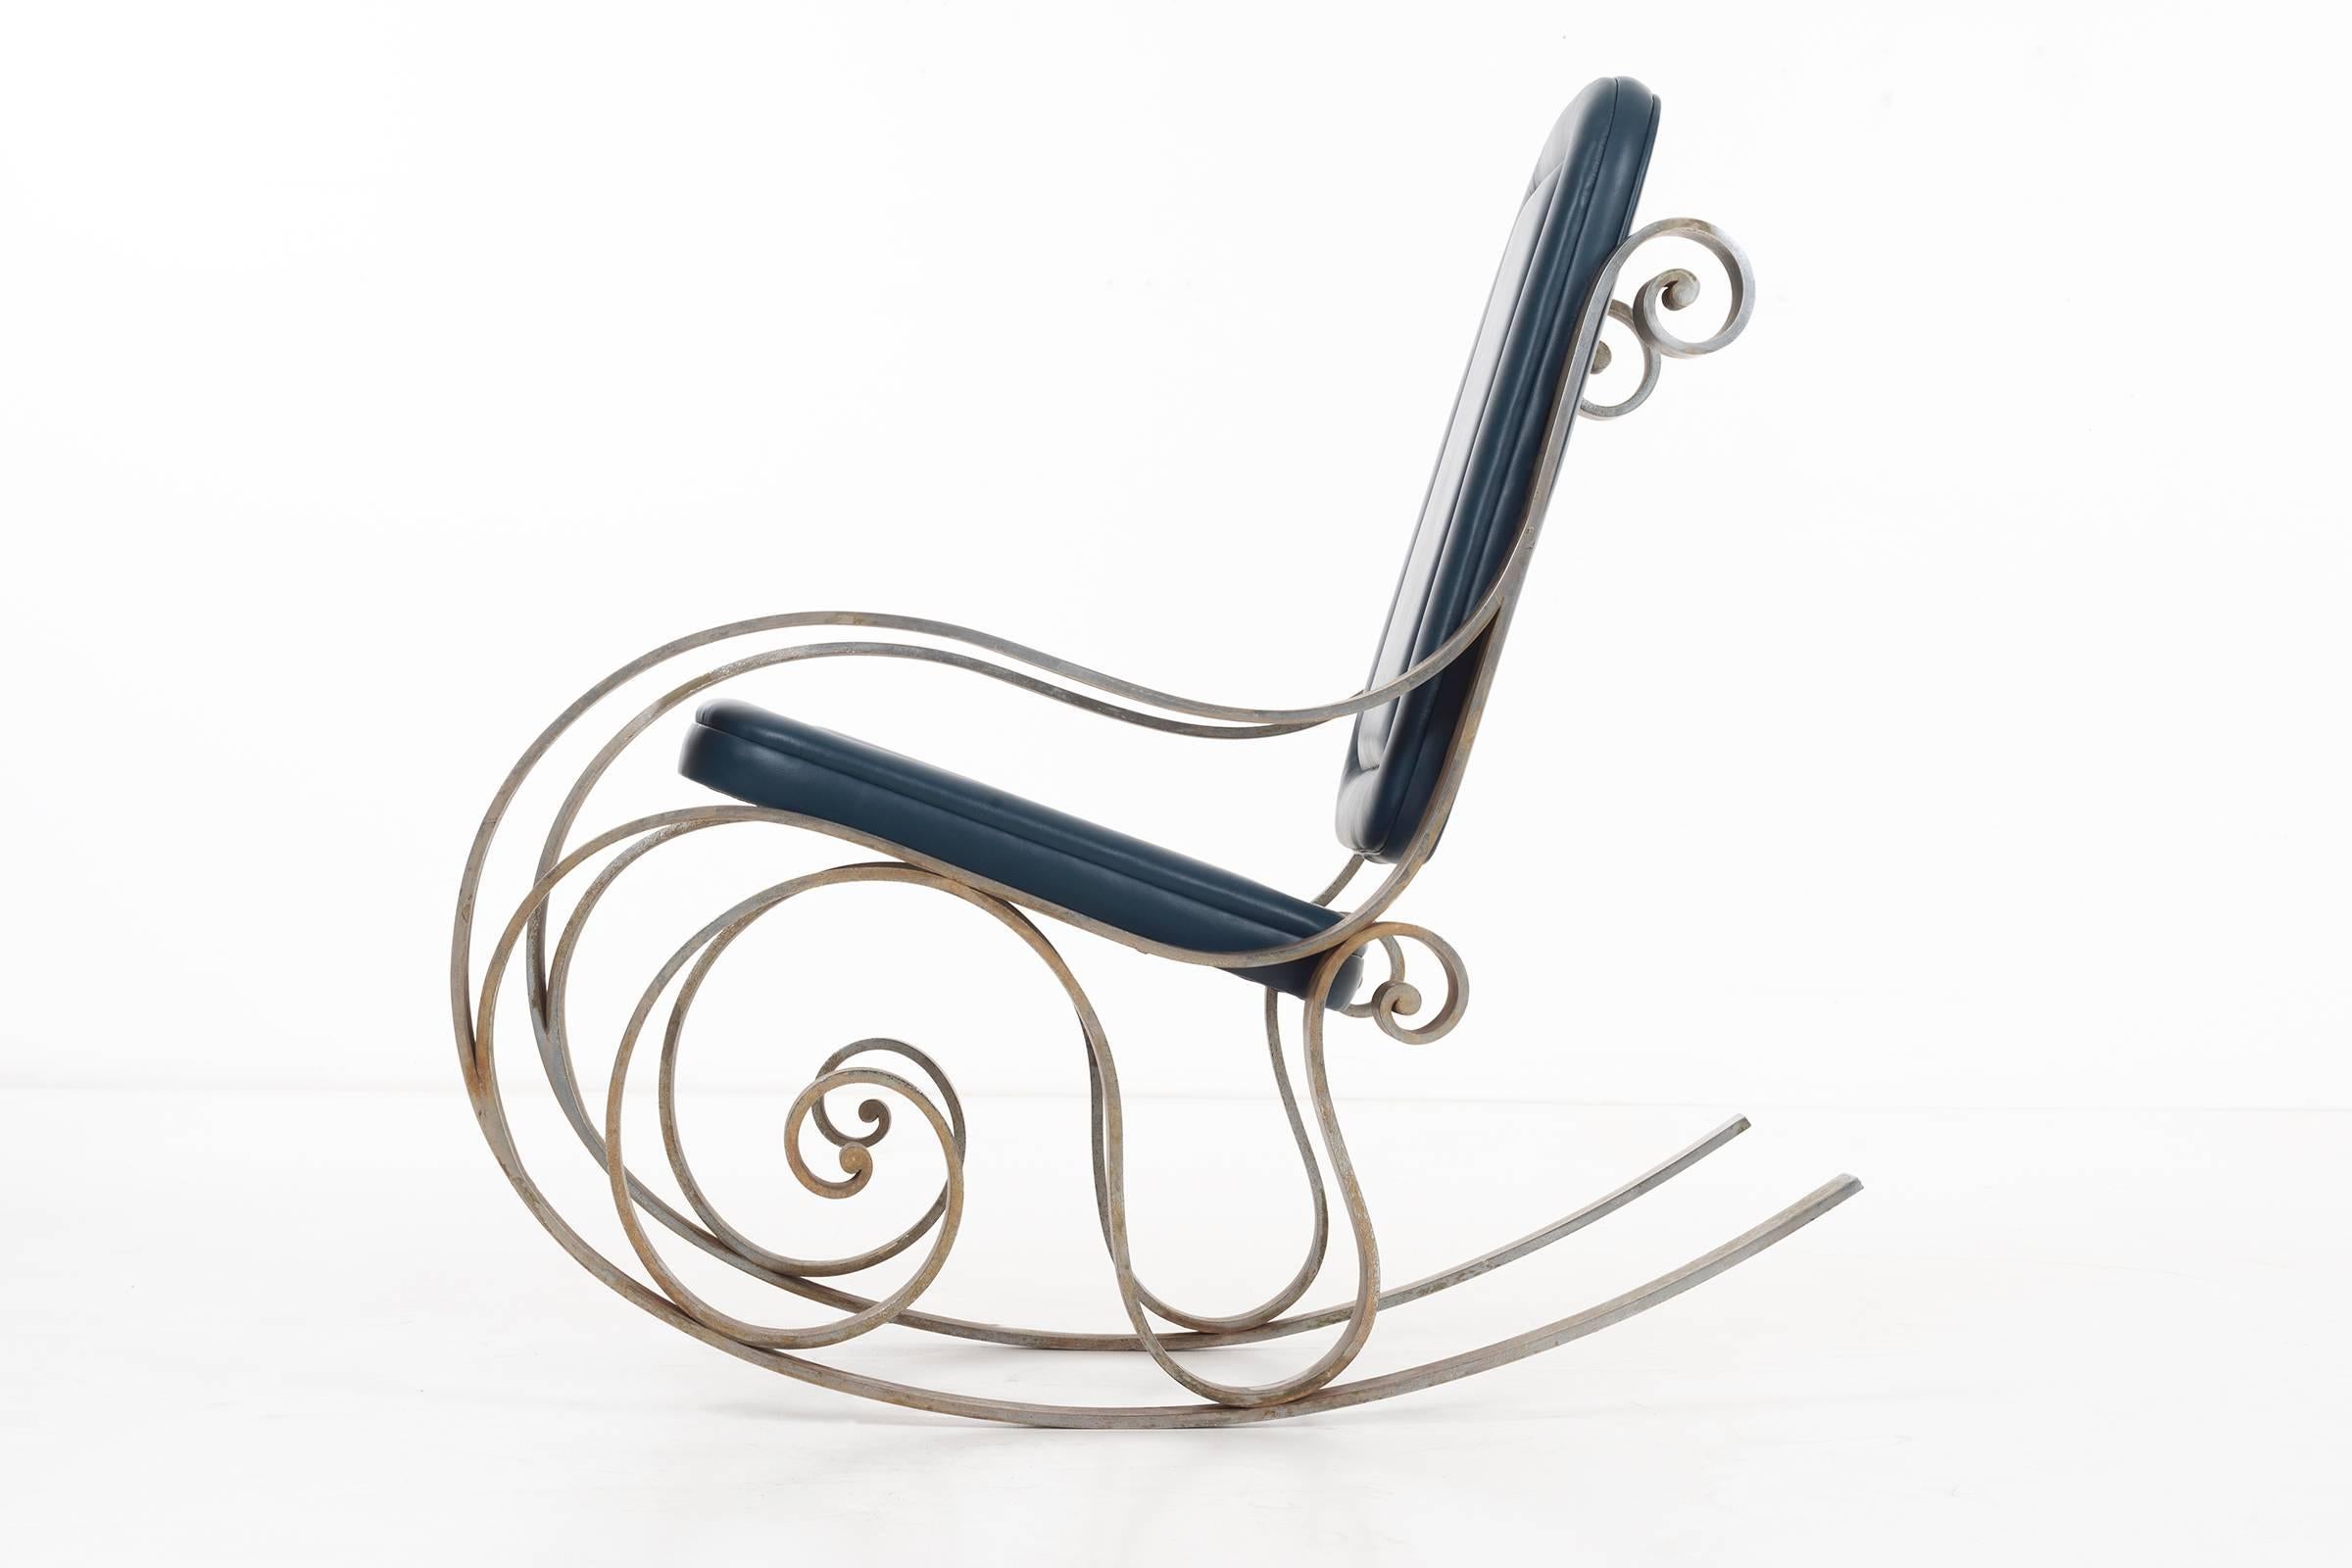 Prototype hand-forged, steel rocker designed by Arturo Pani and executed by Telleres Chacon, Mexico City. The piece has been reupholstered in hand-stitched, Edelman leather with custom piping. This piece was acquired from Telleres Chacon upon the